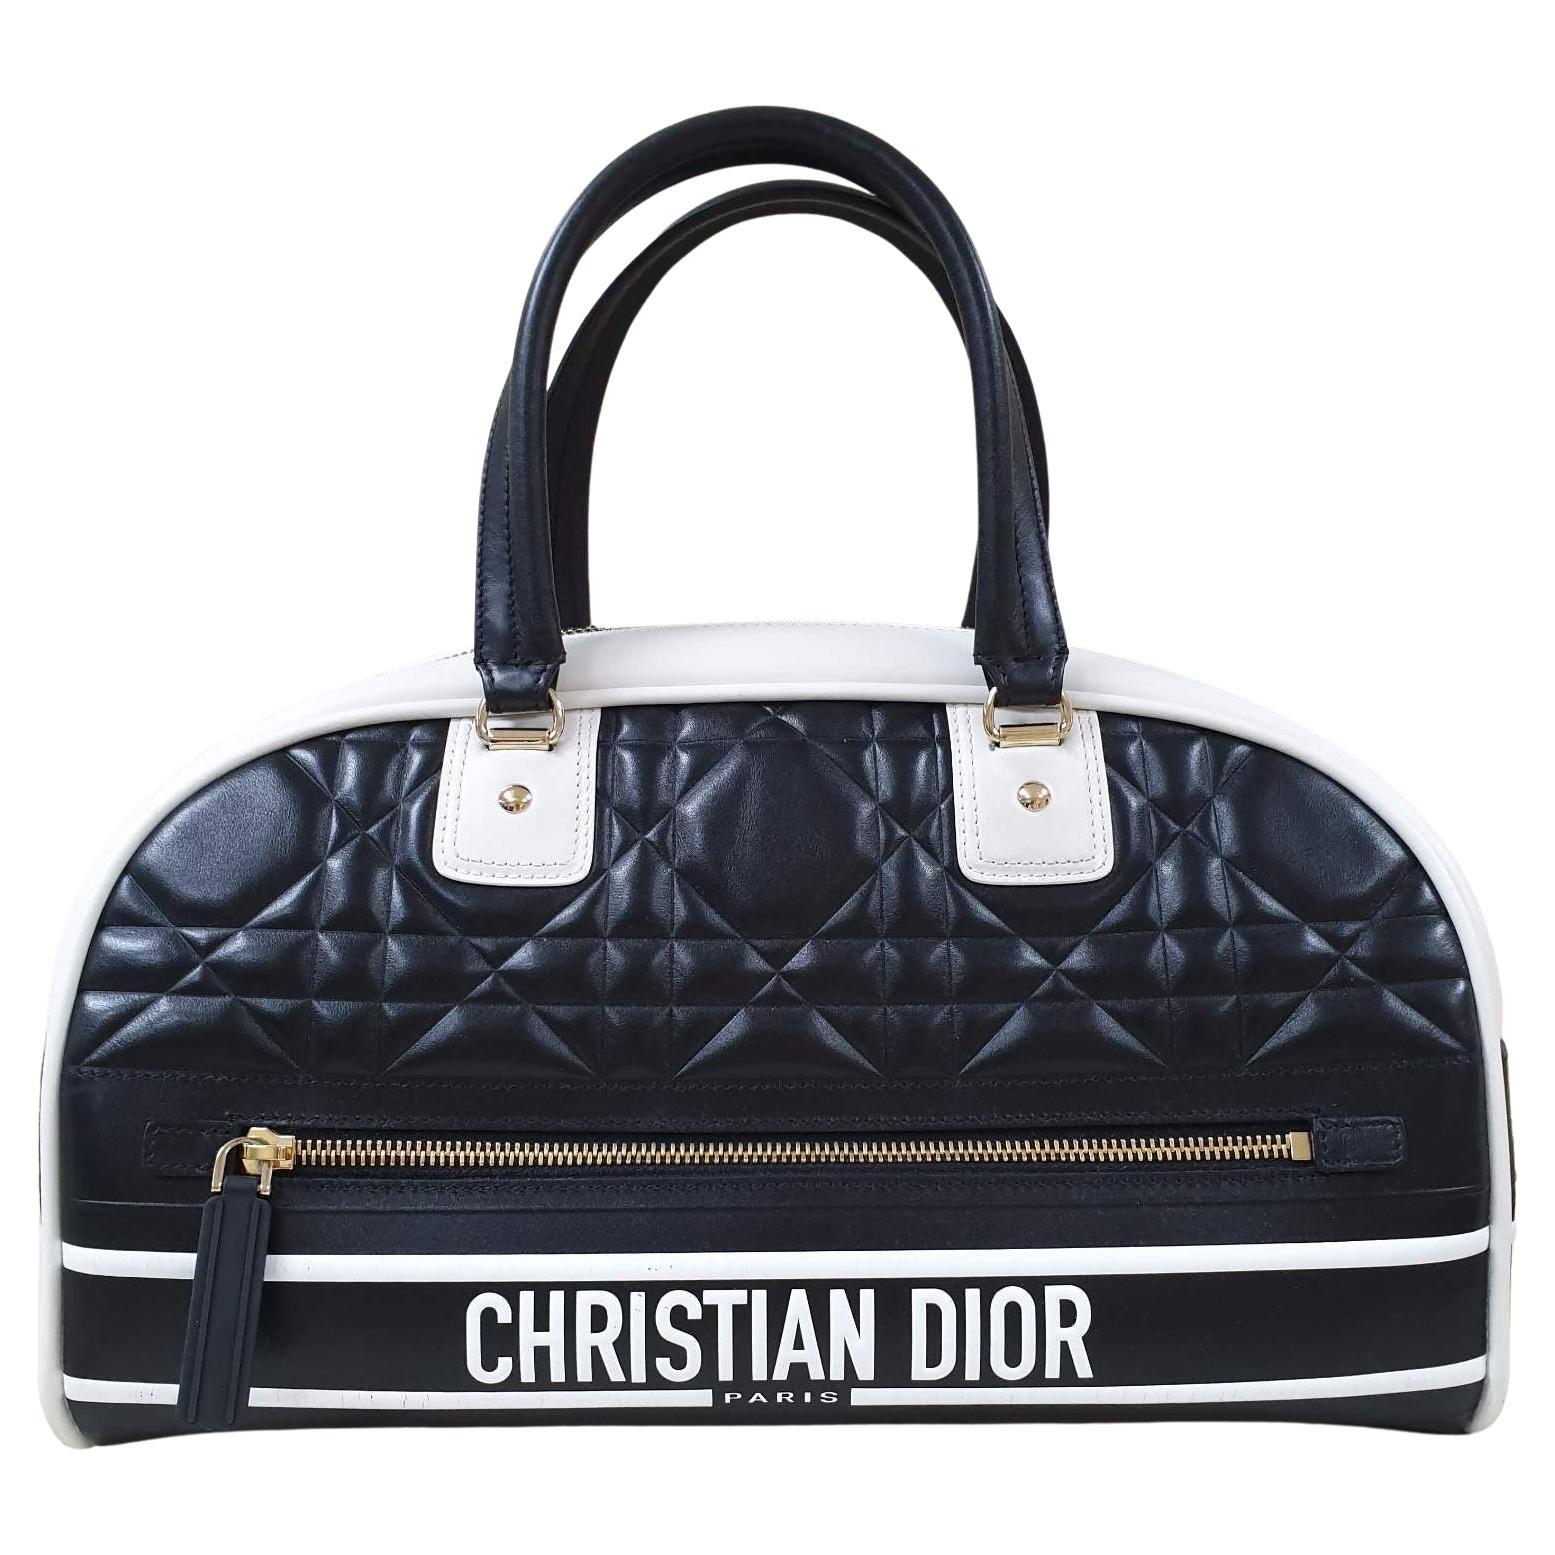 Dior Is Set To Promote It's Bowling Bag This Coming Year: Will